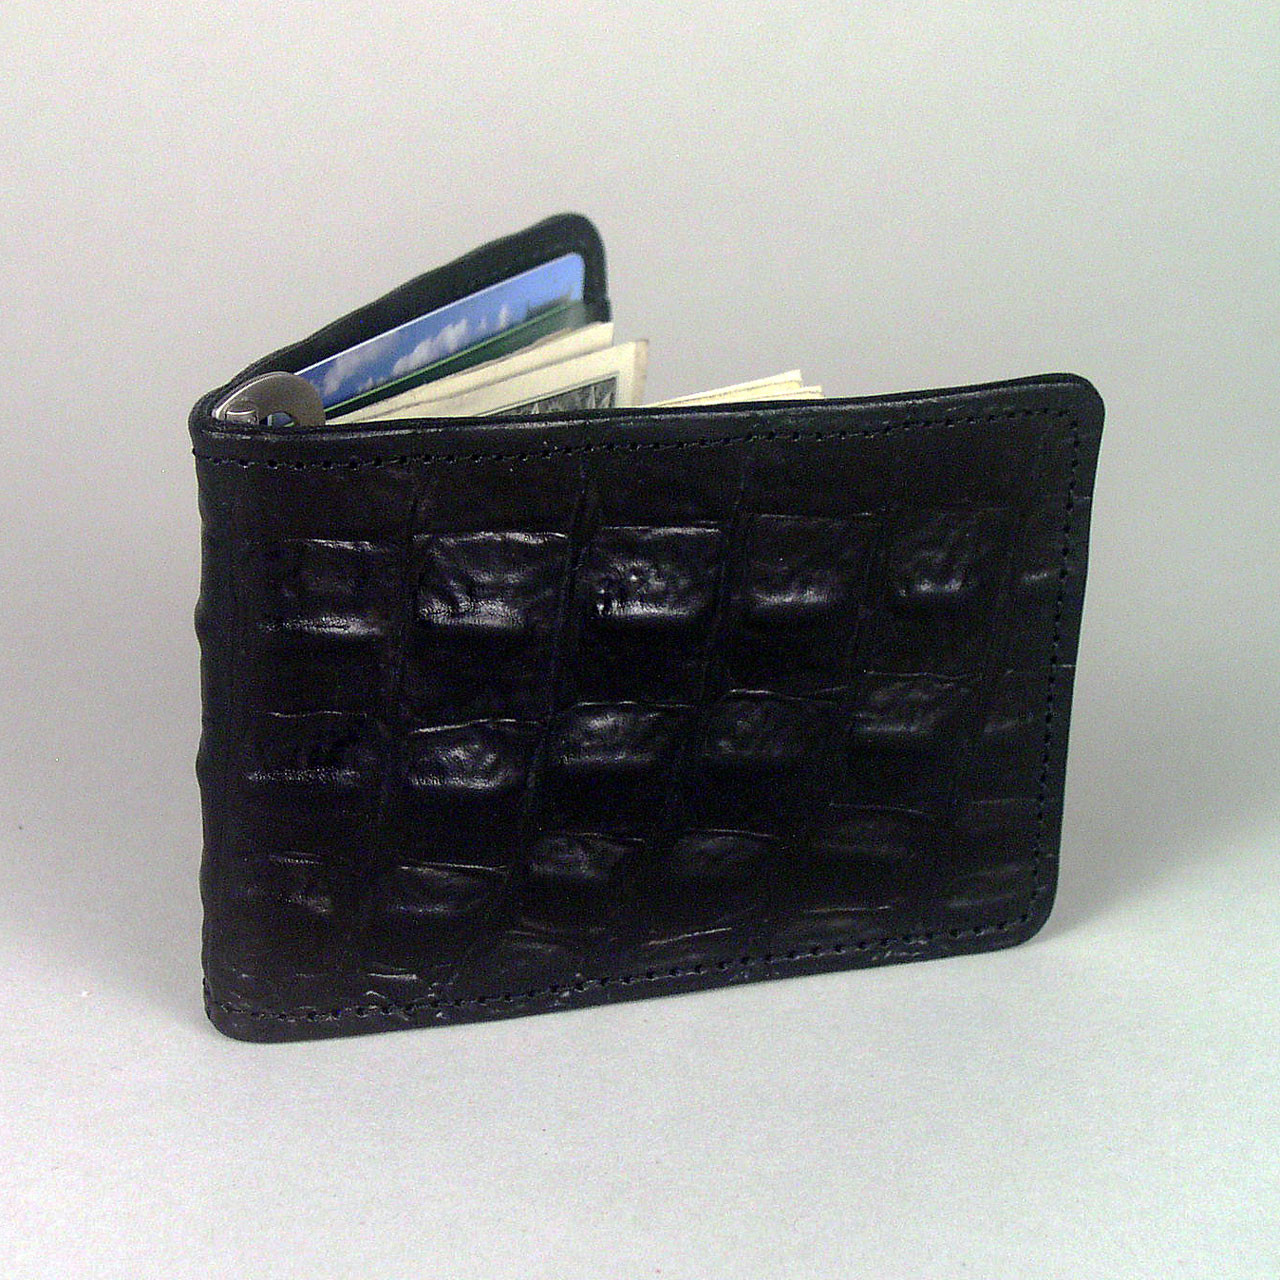 Burberry , Black Embossed Logo Leather Money Clip Card Case Wallet Male One Size